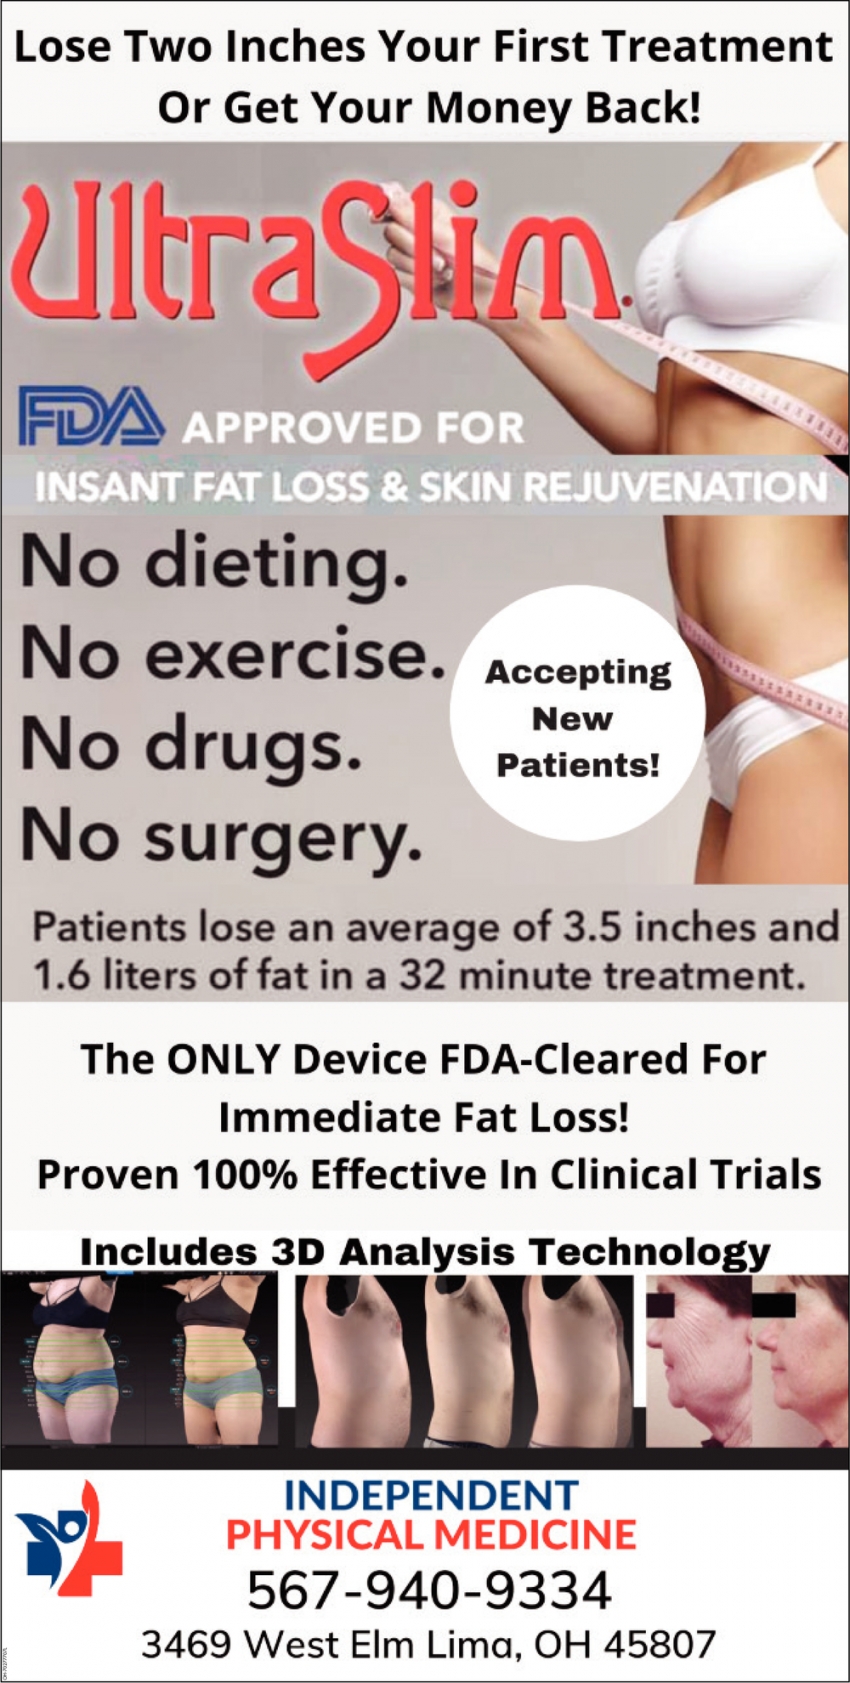 Lose Two Inches Your First Treatment